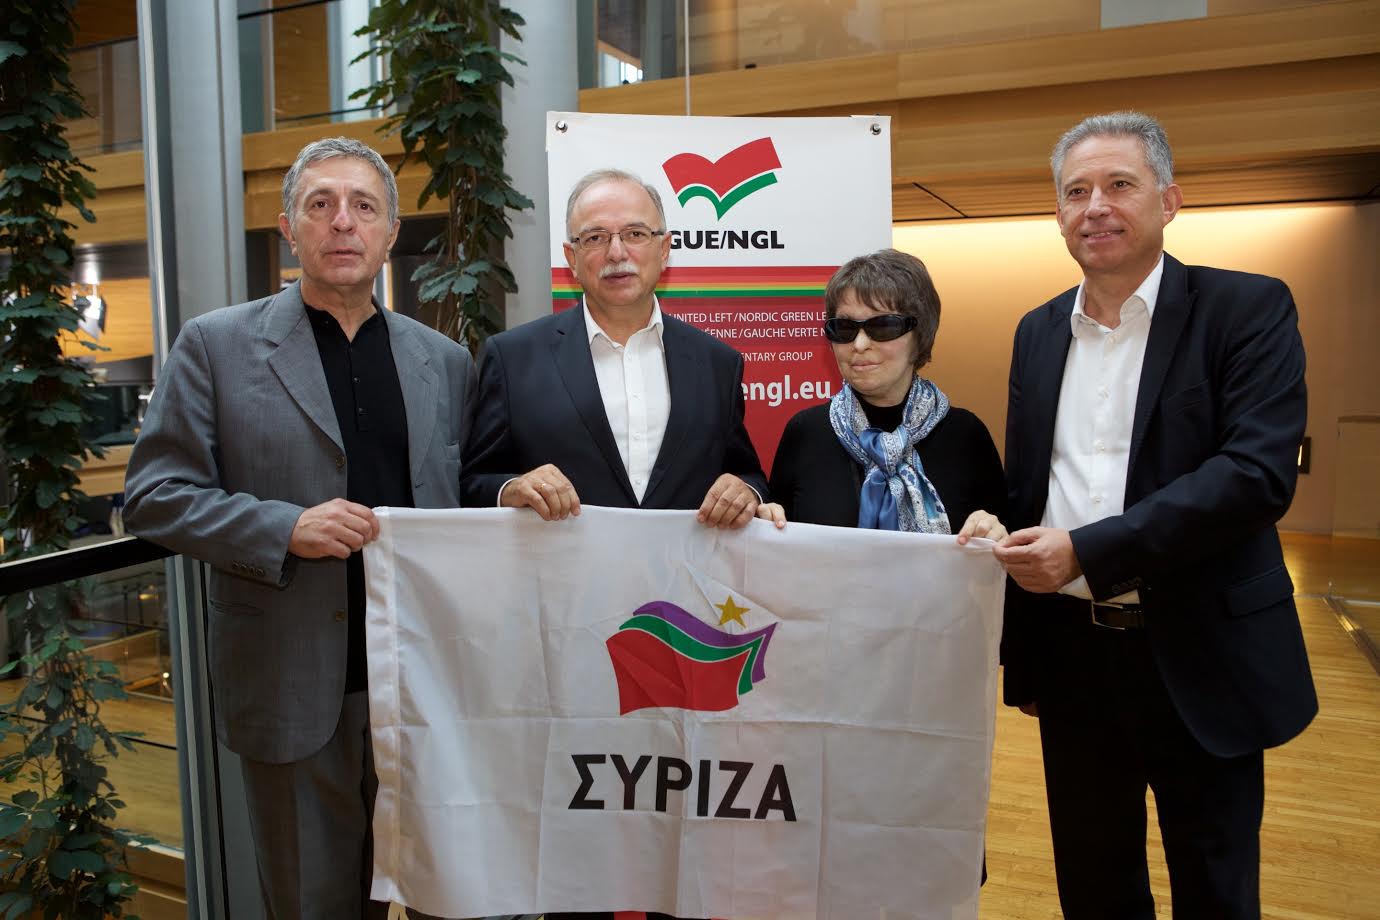 SYRIZA MEPs: A Social Europe is the proposal of progressive forces